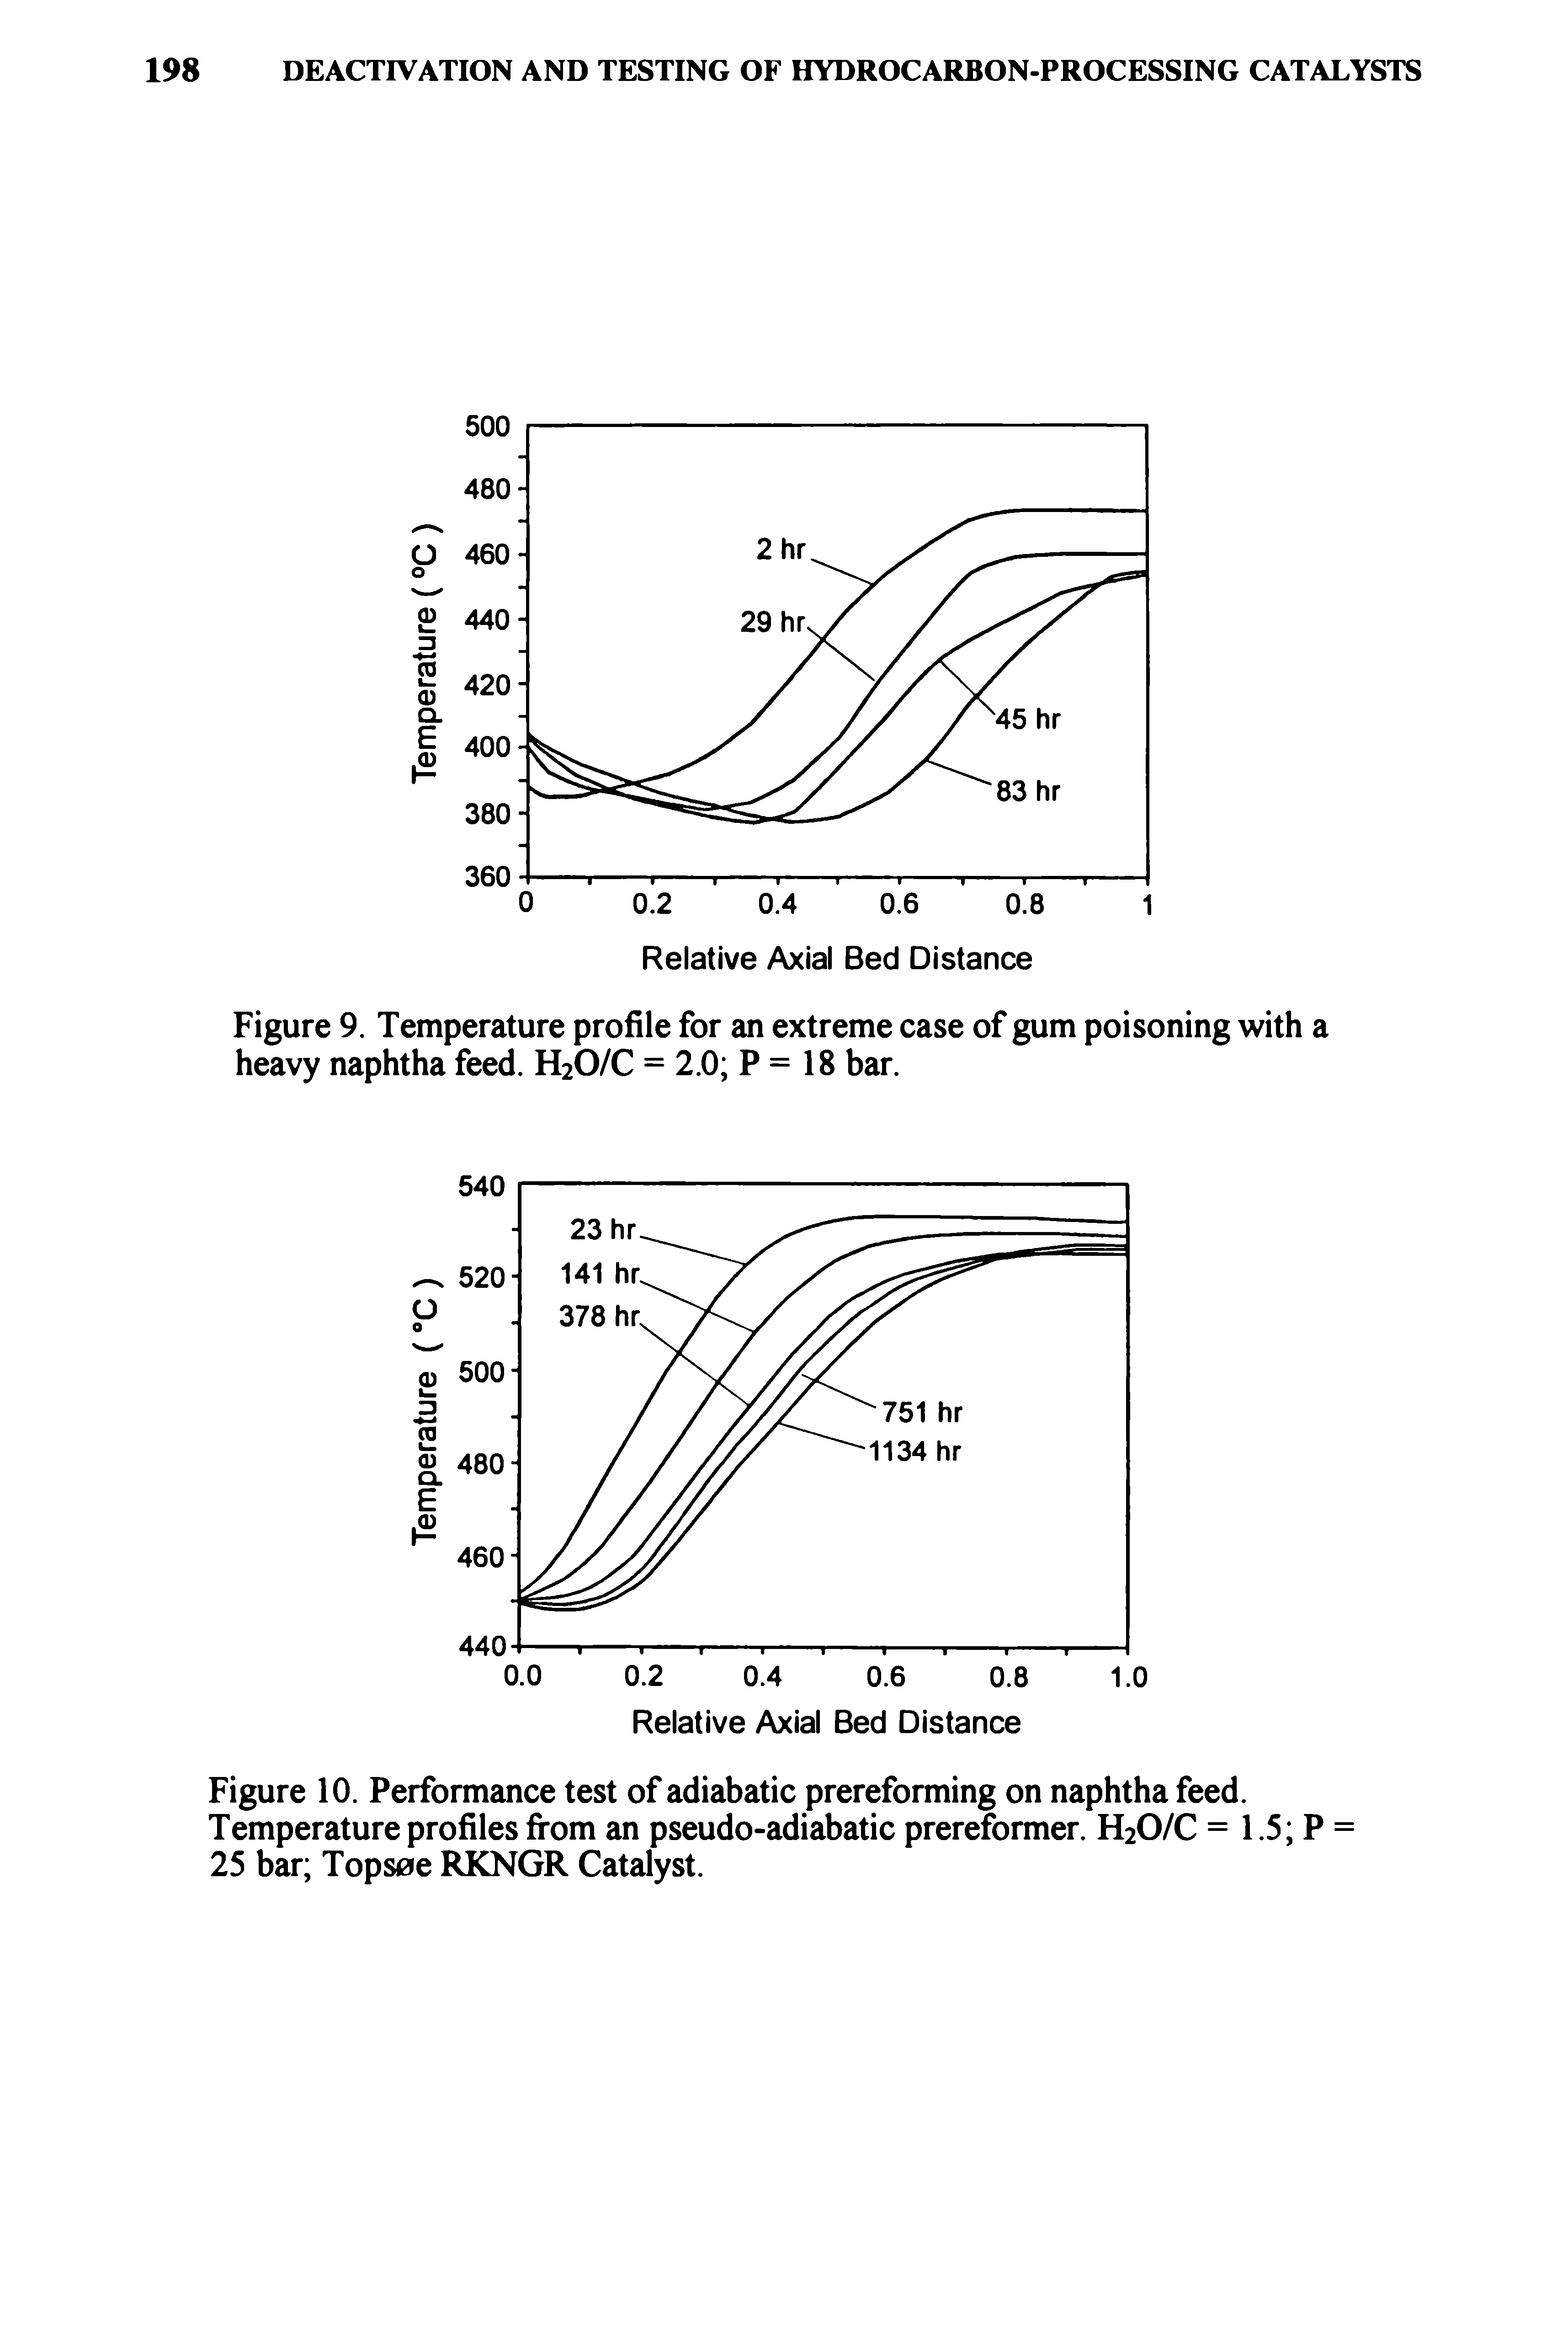 Figure 10. Performance test of adiabatic prereforming on naphtha feed. Temperature profiles from an pseudo-adiabatic prereformer. H2O/C = 1.5 P = 25 bar Topsoe RKNGR Catalyst.